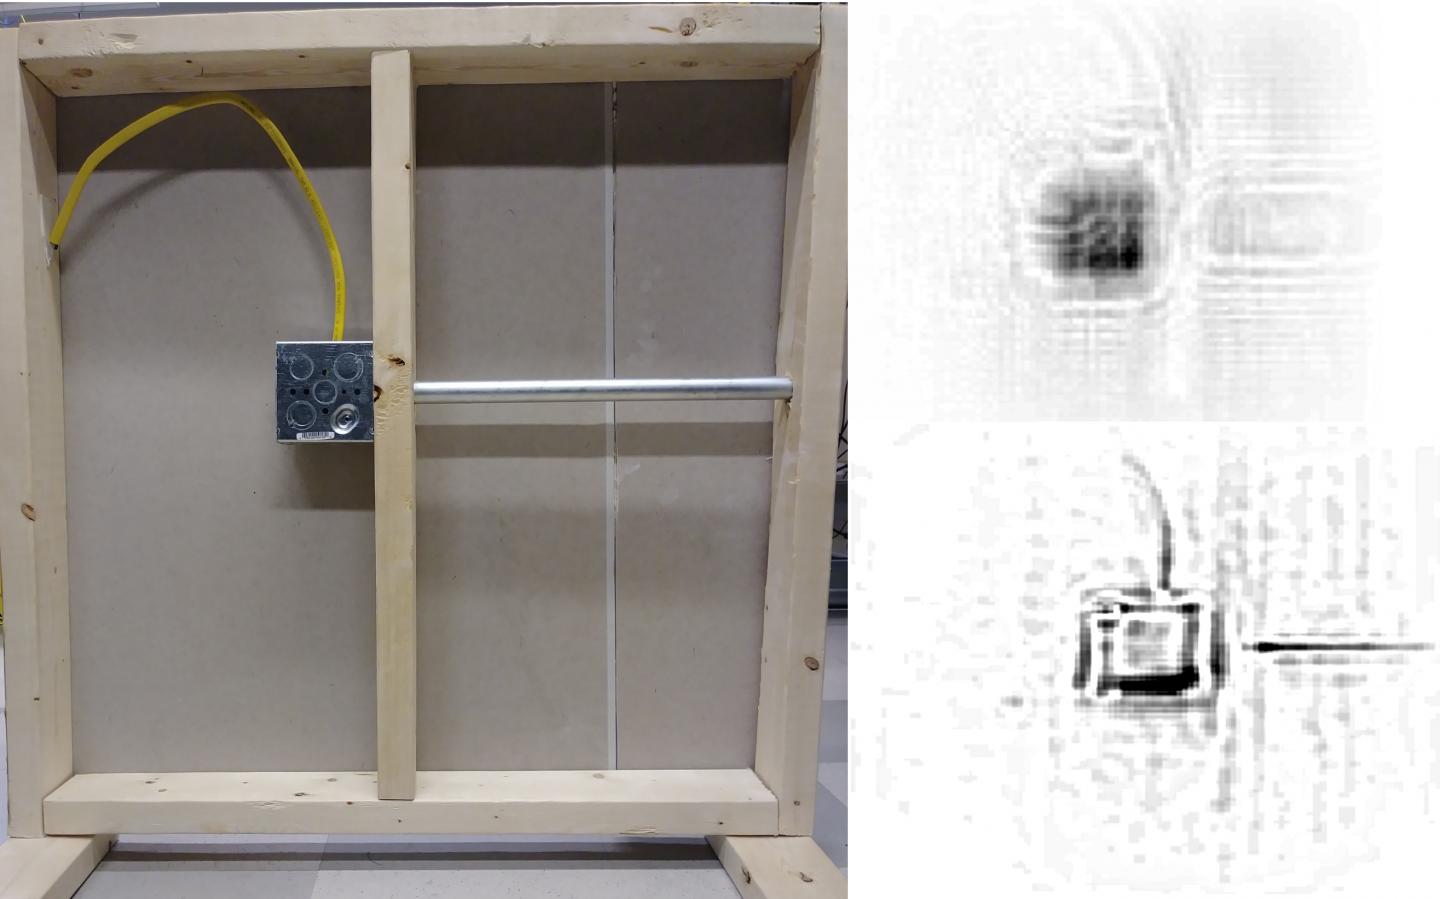 A view of a microwave scan of a typical wall interior before and after distortions have been removed. By taking into account the types of distortions typically created by flat, uniform walls, the new algorithm allows for better scans without needing to know what the wall is made of beforehand. Source: Daniel Marks, Duke University